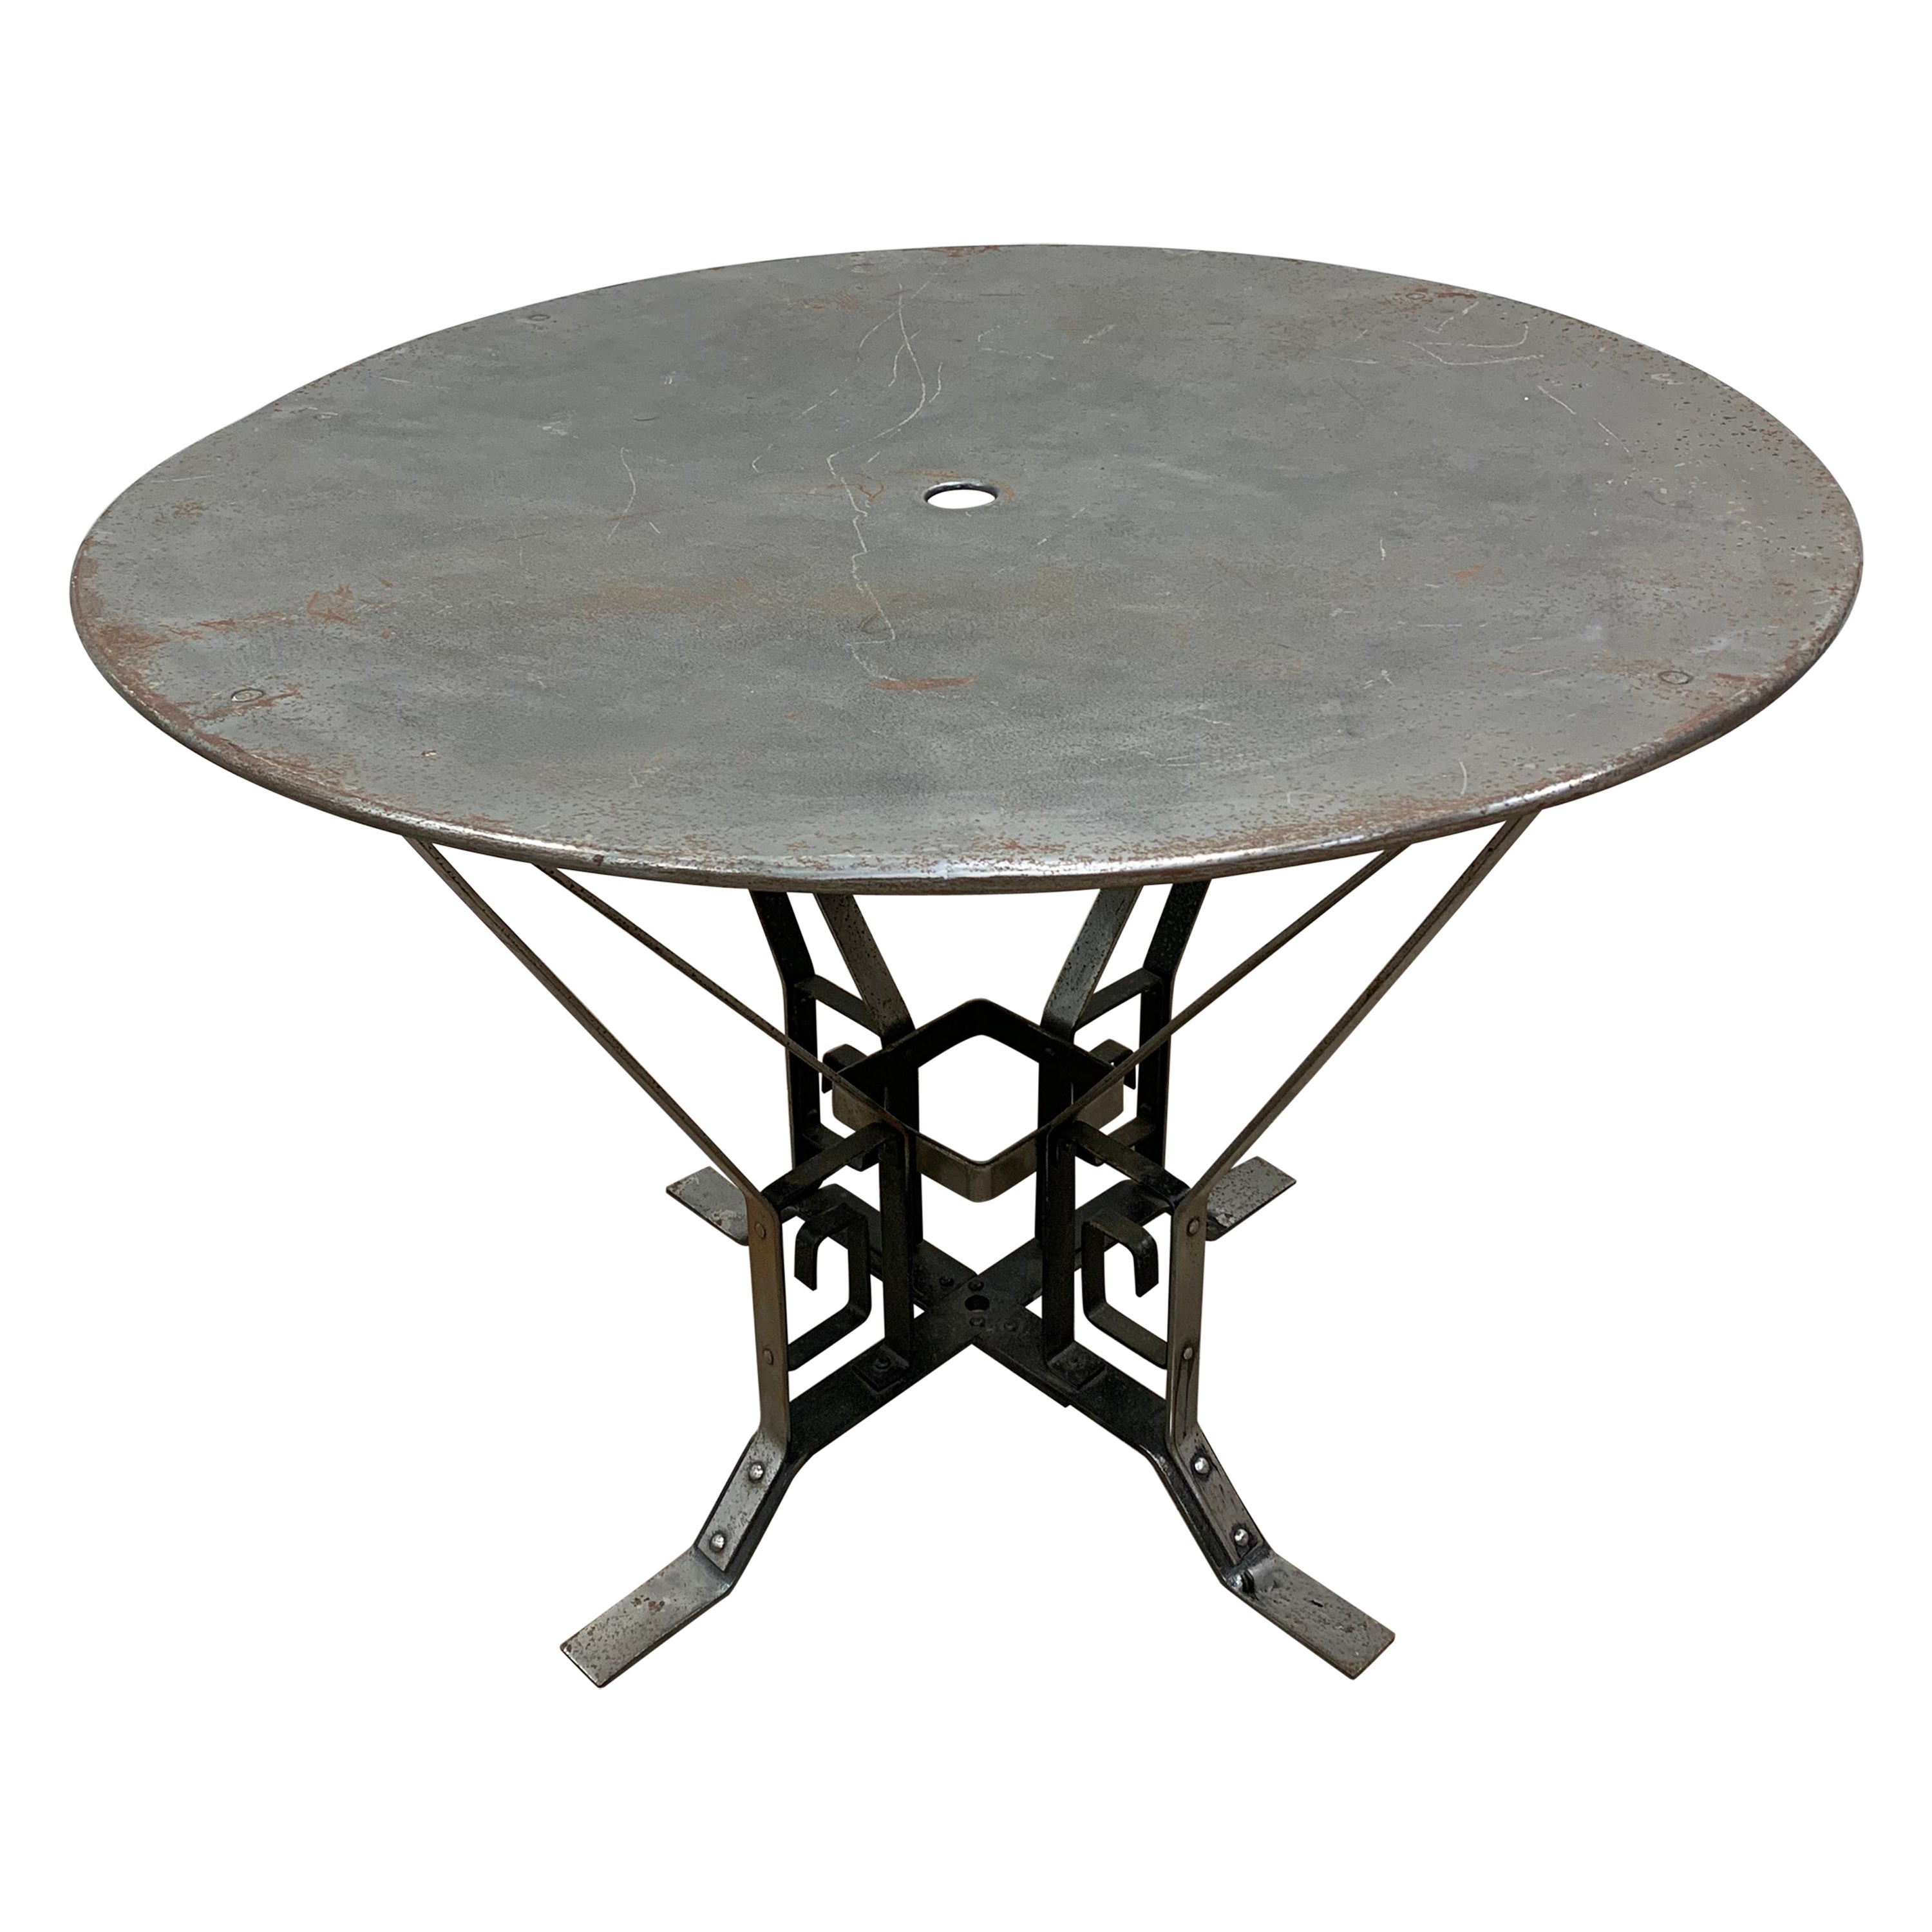 1930s Art Deco French Architecturally Inspired Polished Metal Garden Table  For Sale